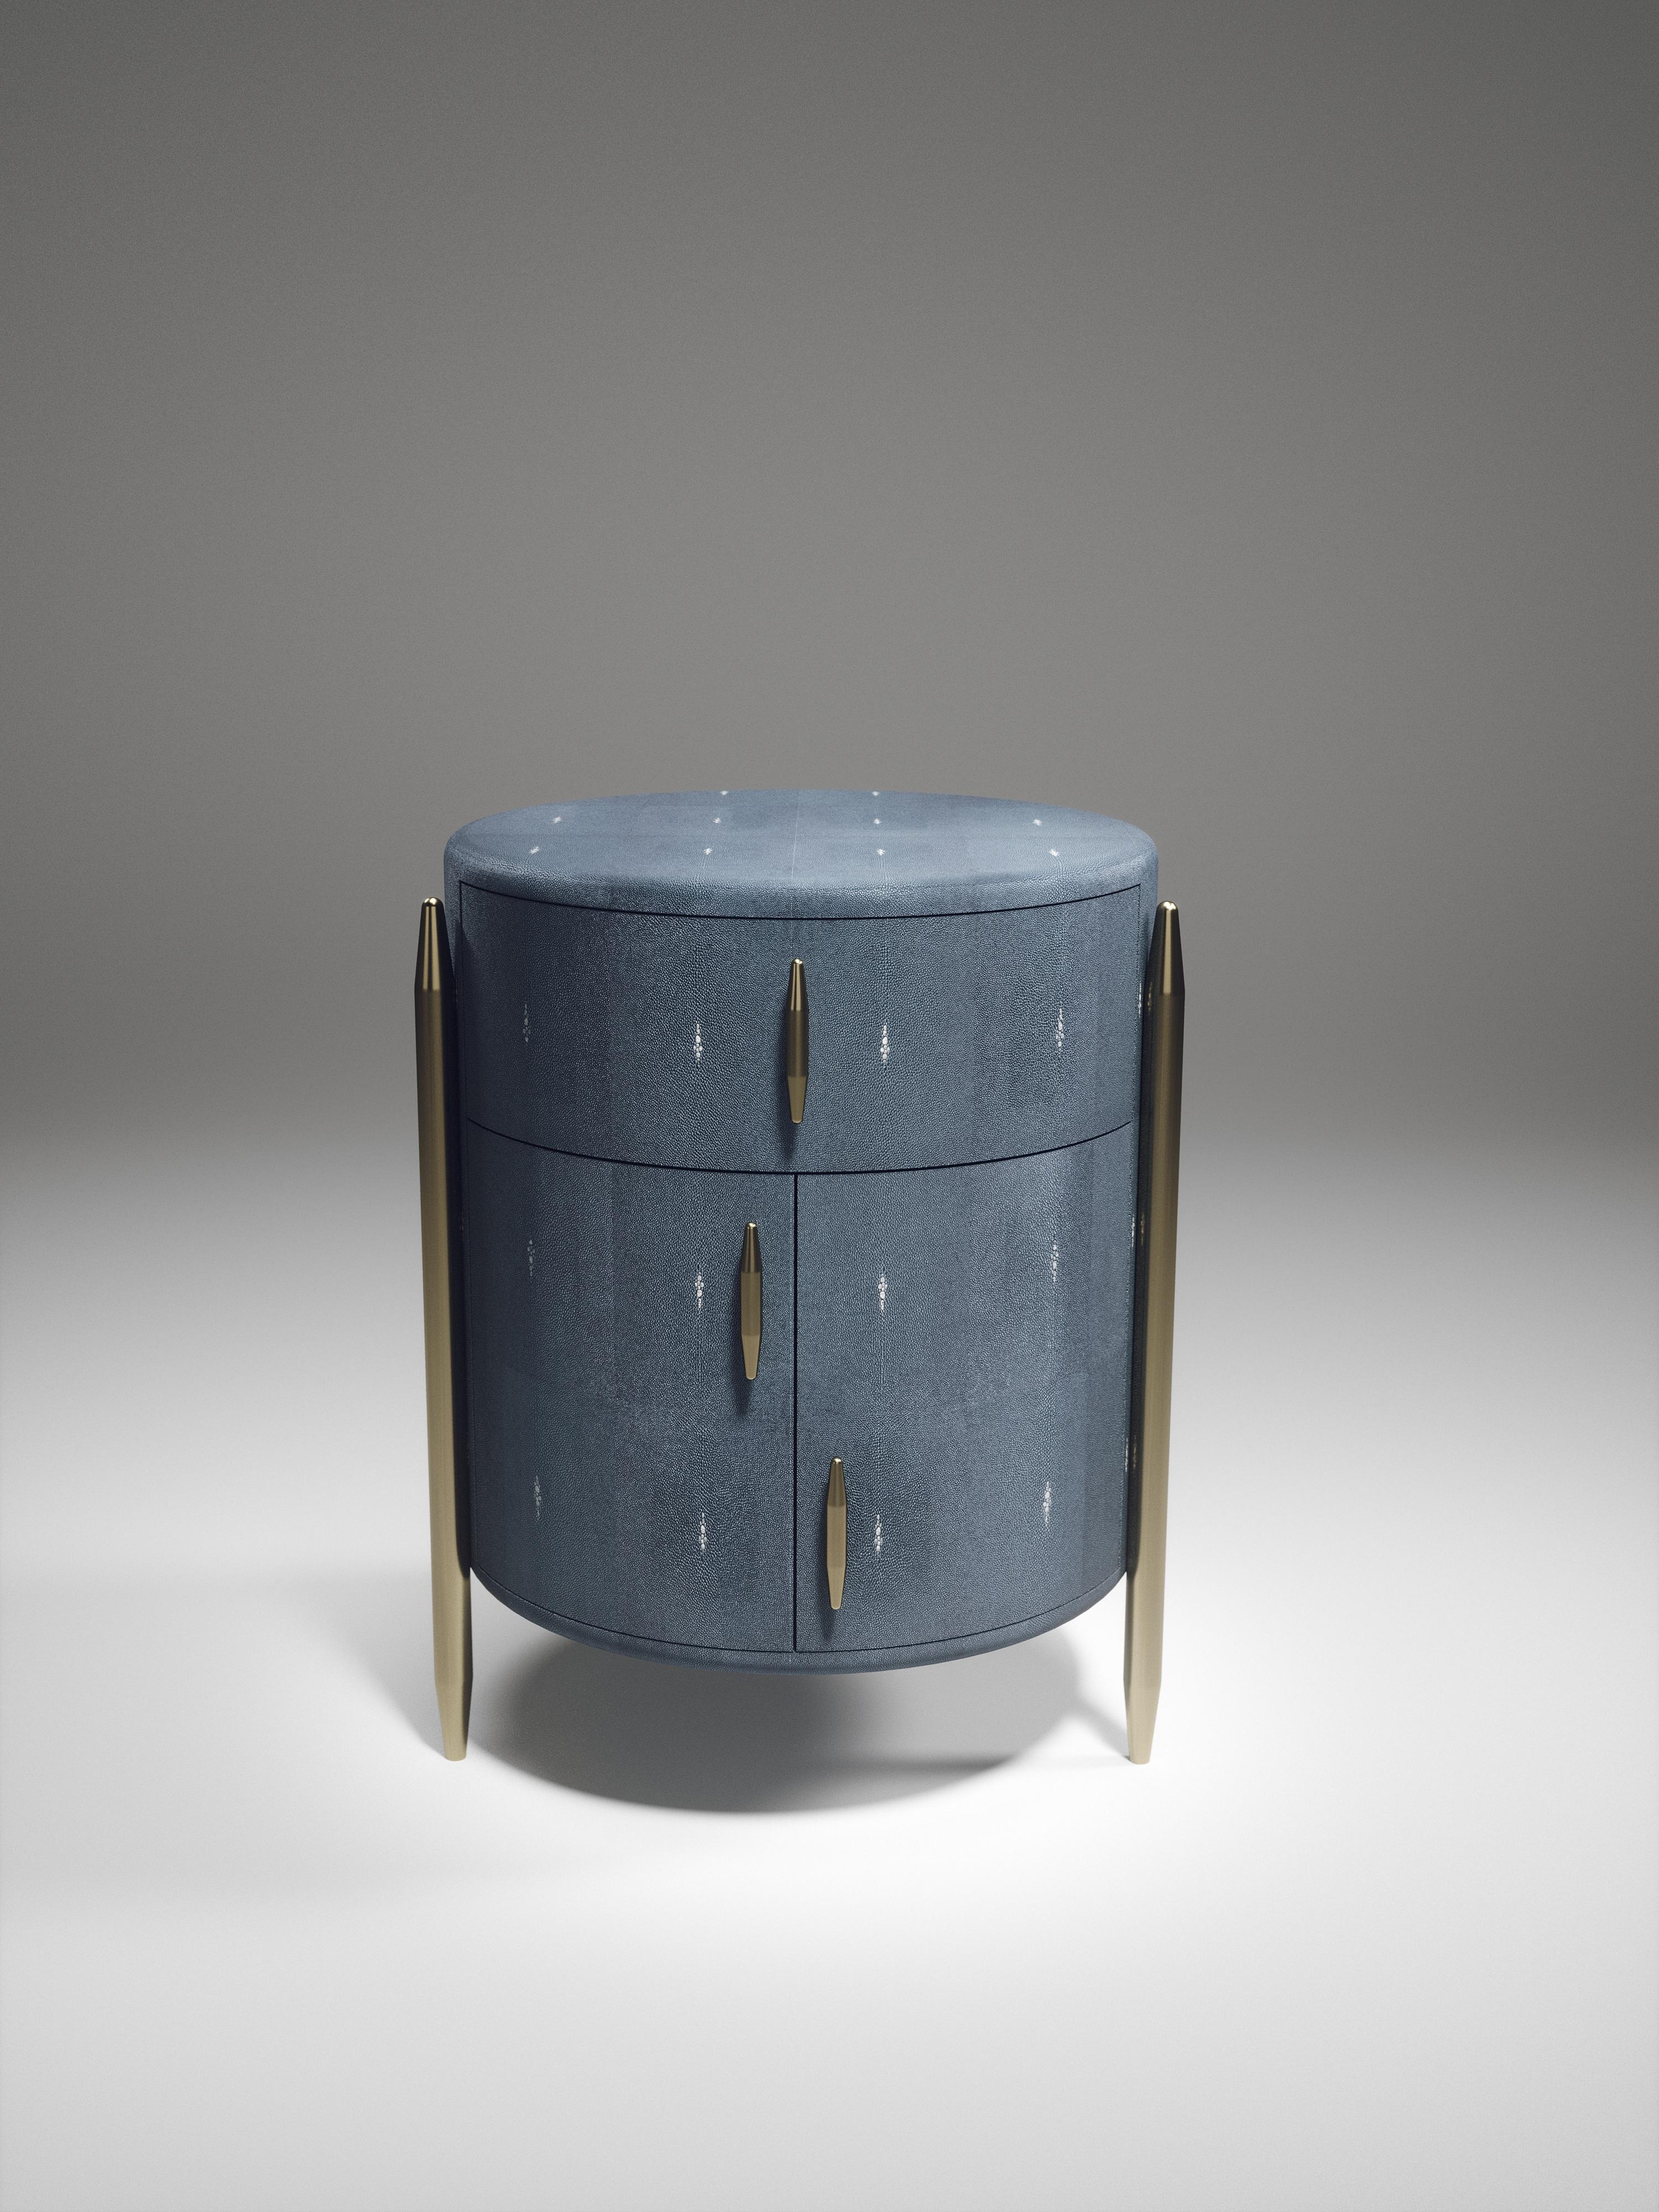 The pair of dandy round bedside tables by Kifu Paris are elegant and luxurious home accents, inlaid in dark denim blue shagreen with bronze-patina brass details. This piece includes 1 drawer total and a cabinet below; the interiors are inlaid in